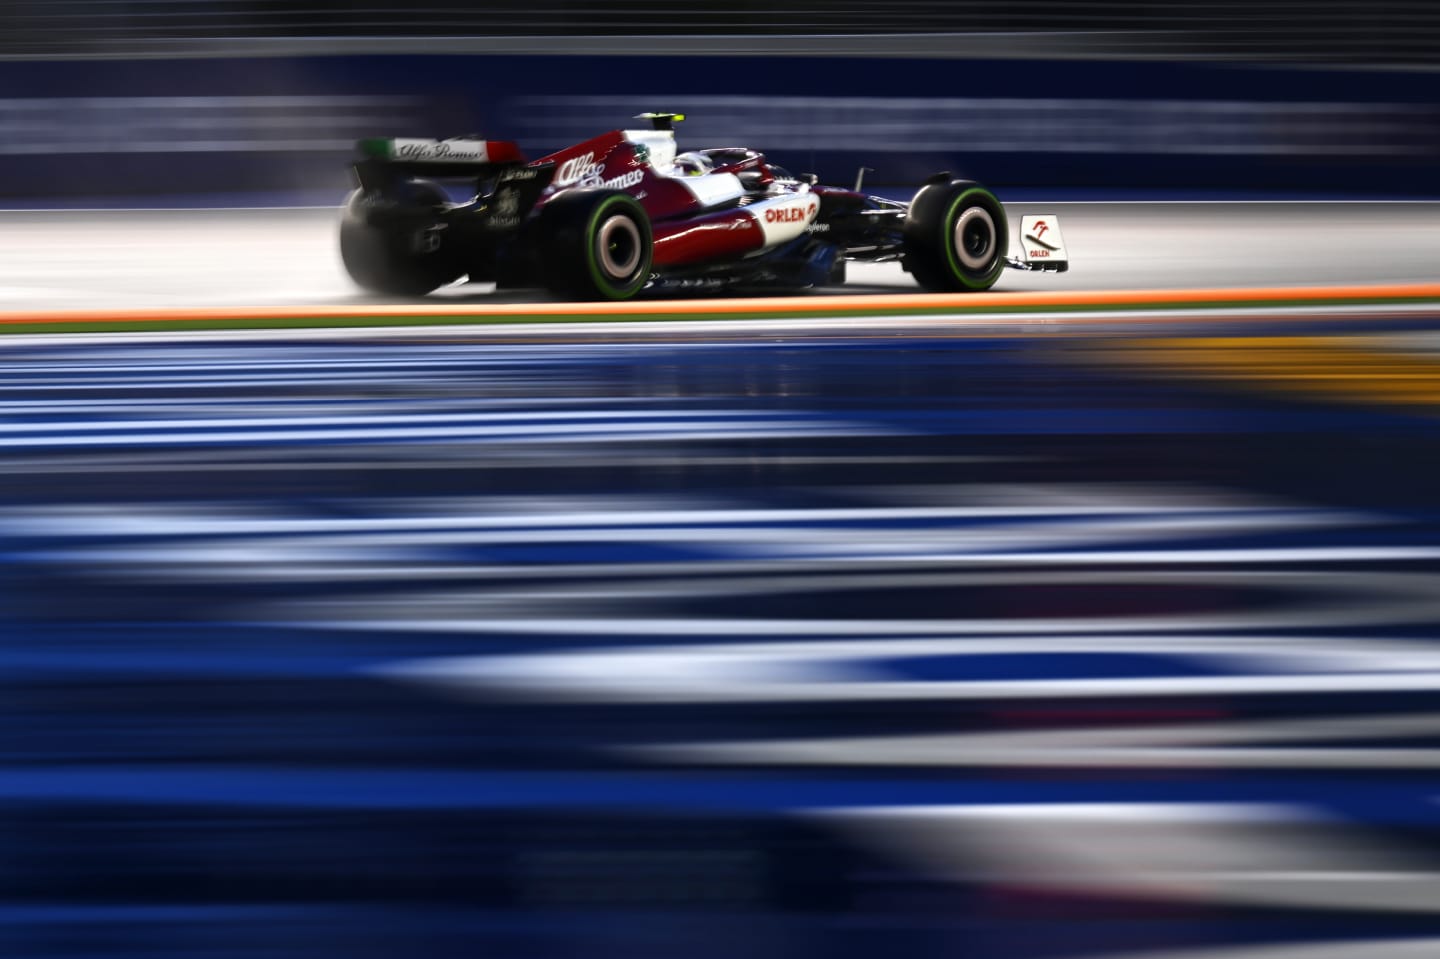 SINGAPORE, SINGAPORE - OCTOBER 01: Zhou Guanyu of China driving the (24) Alfa Romeo F1 C42 Ferrari on track during final practice ahead of the F1 Grand Prix of Singapore at Marina Bay Street Circuit on October 01, 2022 in Singapore, Singapore. (Photo by Clive Mason/Getty Images)